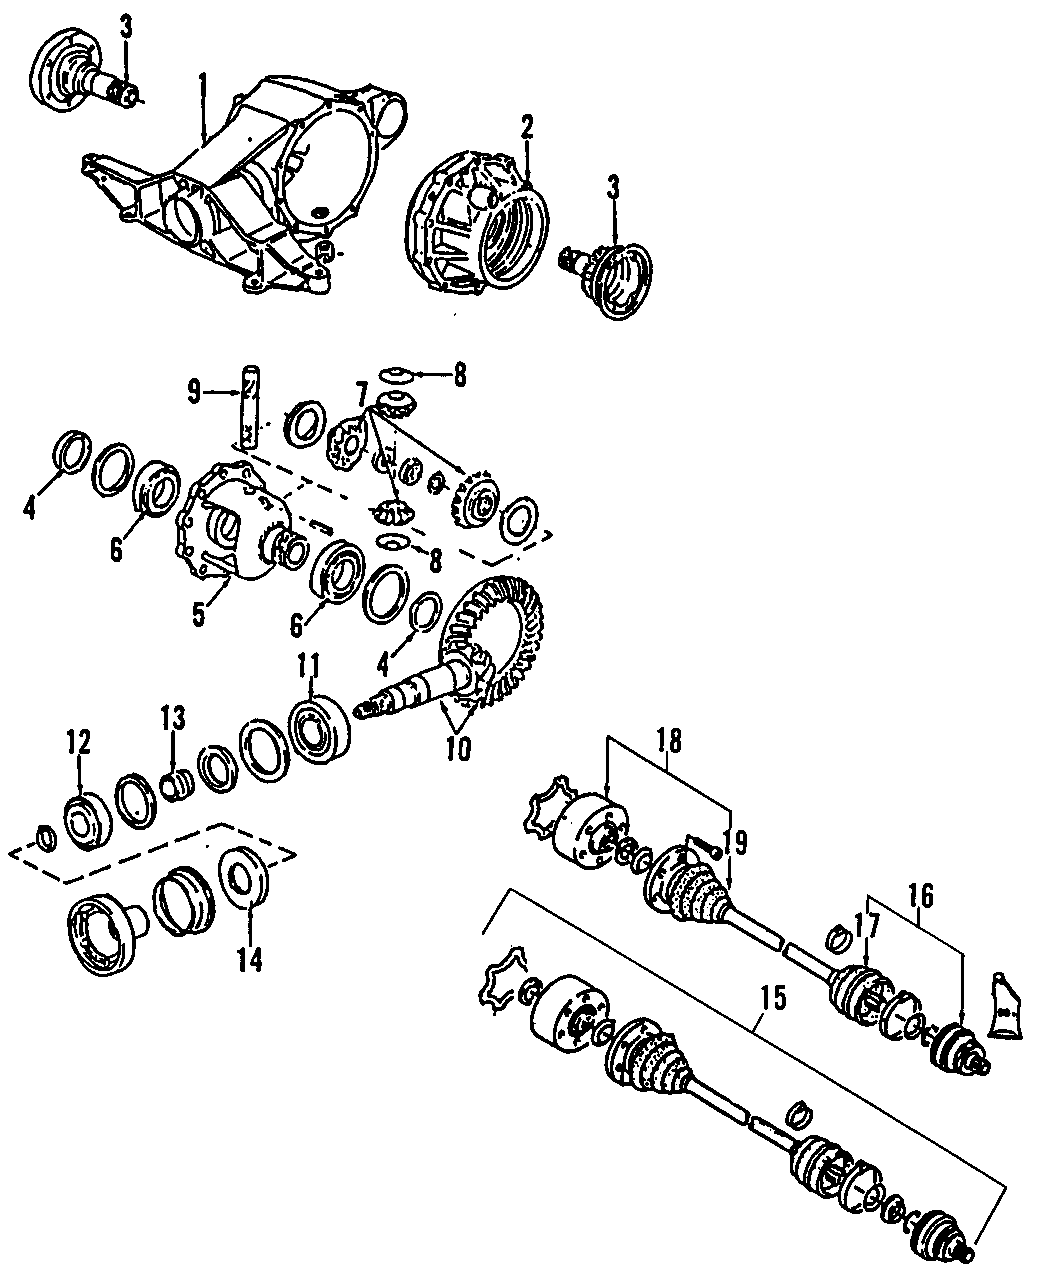 10DRIVE AXLES. REAR AXLE. AXLE SHAFTS & JOINTS. DIFFERENTIAL. PROPELLER SHAFT.https://images.simplepart.com/images/parts/motor/fullsize/F257120.png